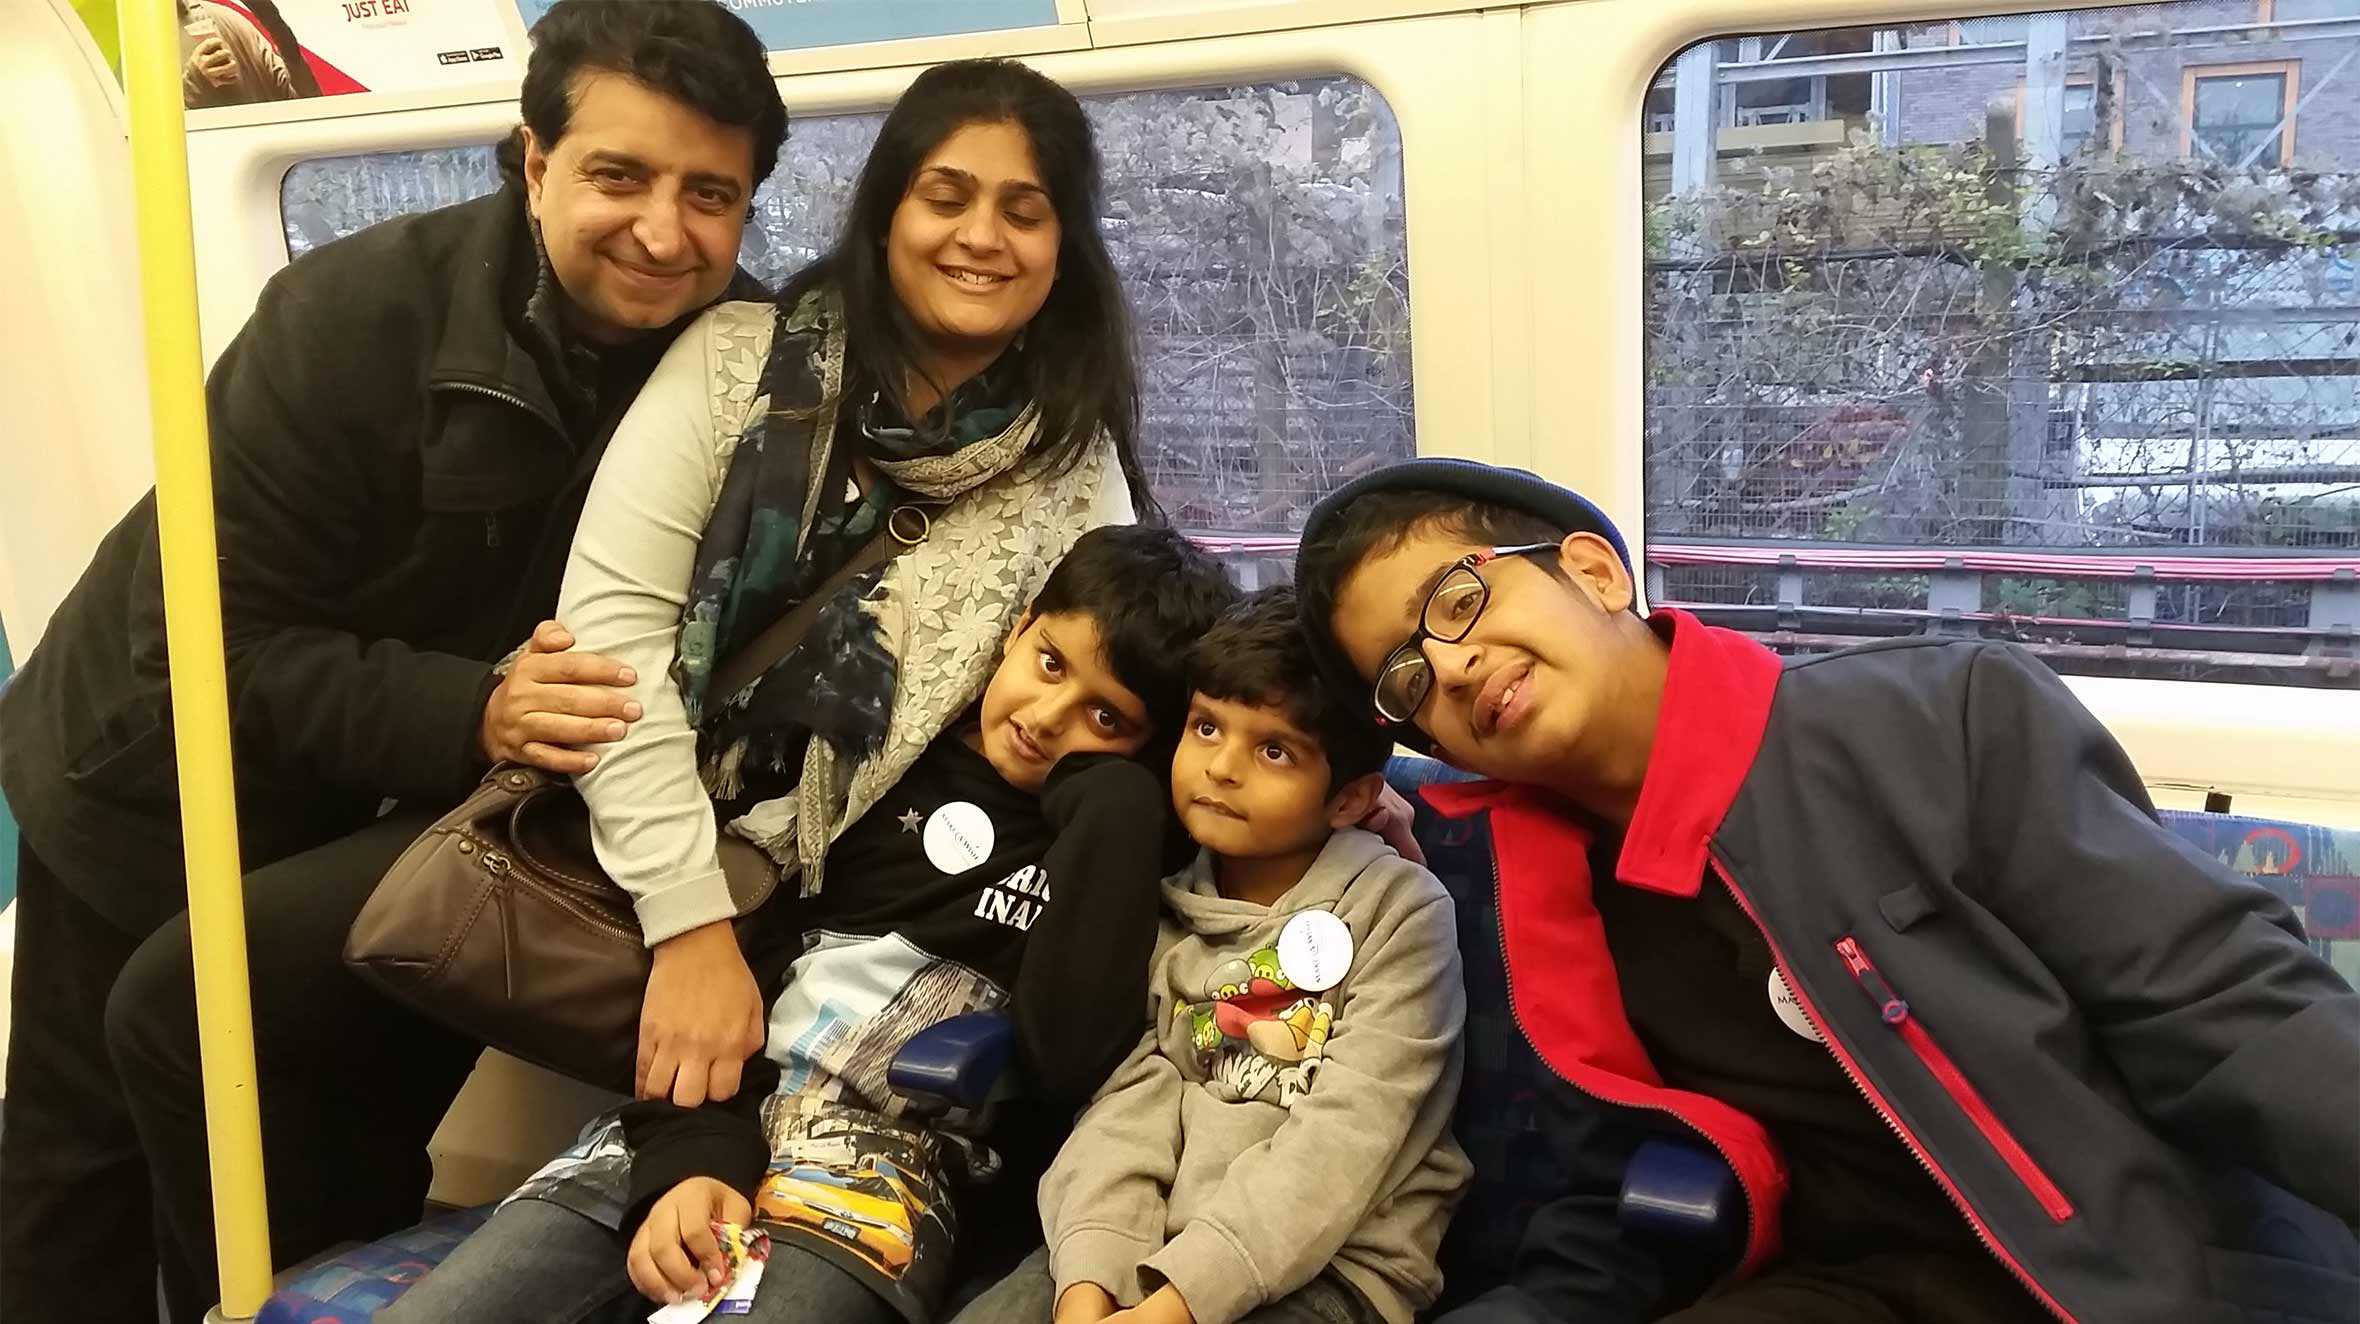 Krish and his family sat together on the tube.